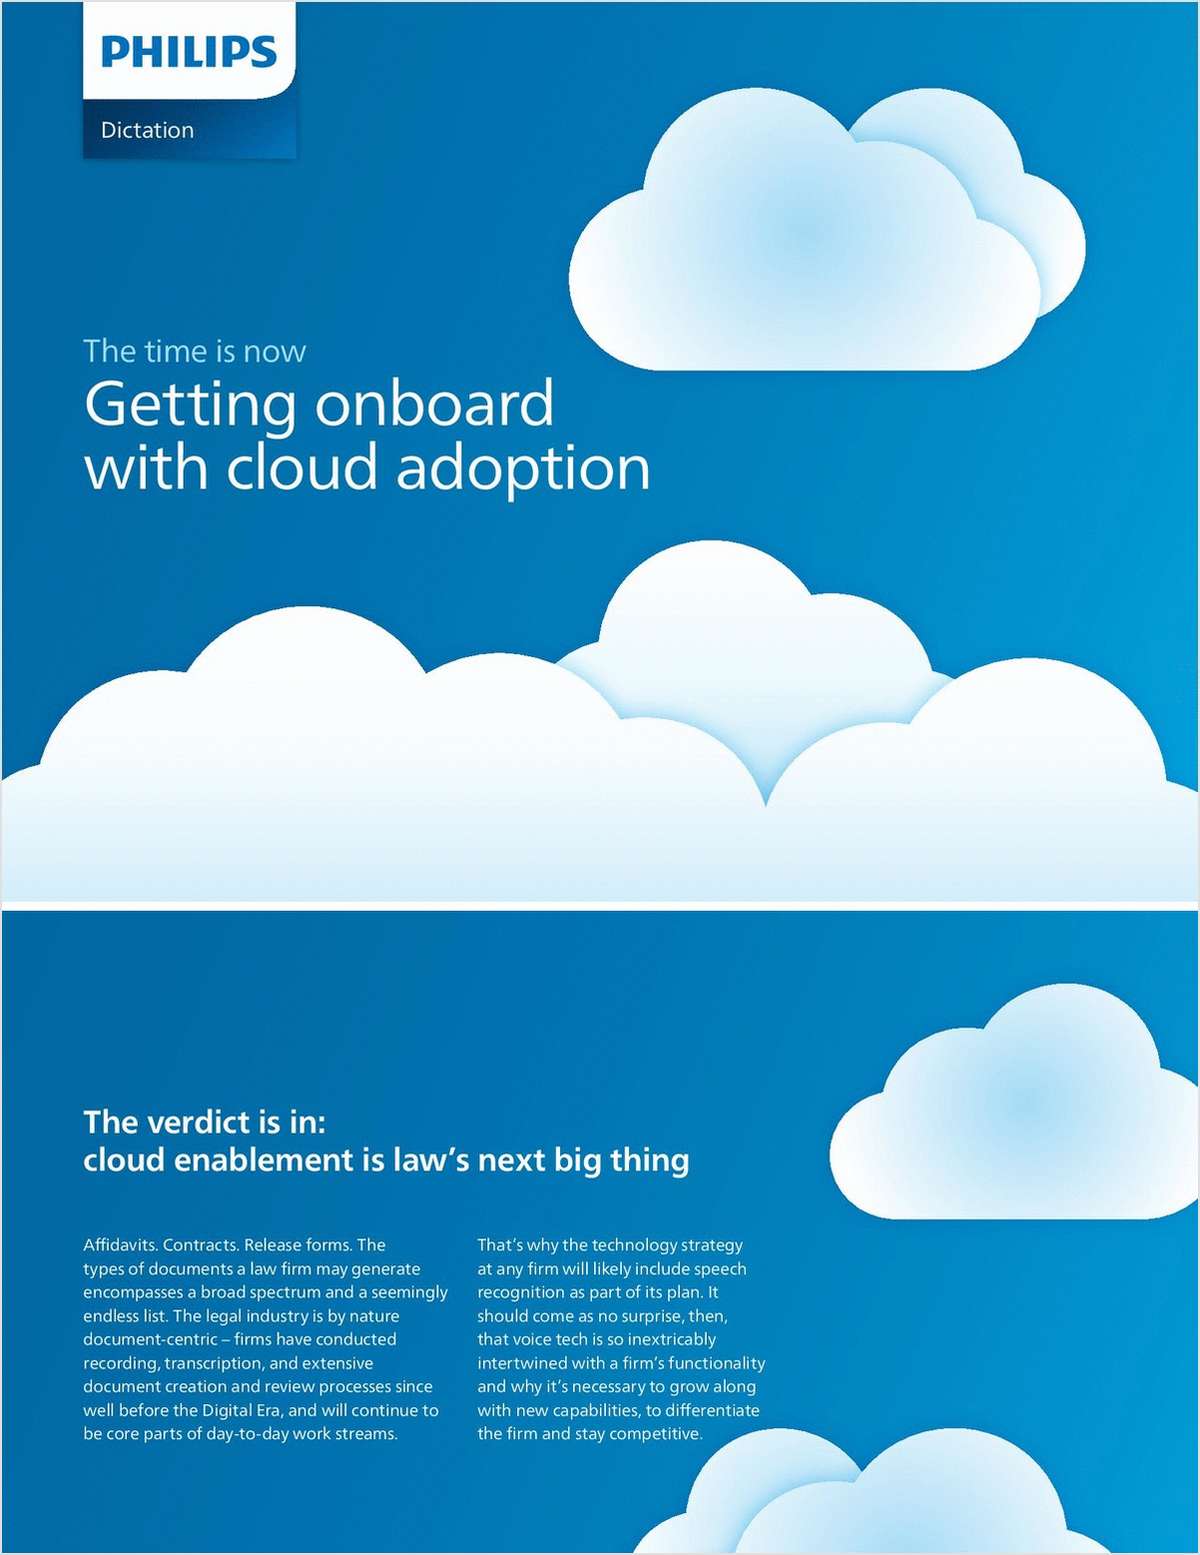 The Time Is Now: Getting Onboard With Cloud Adoption